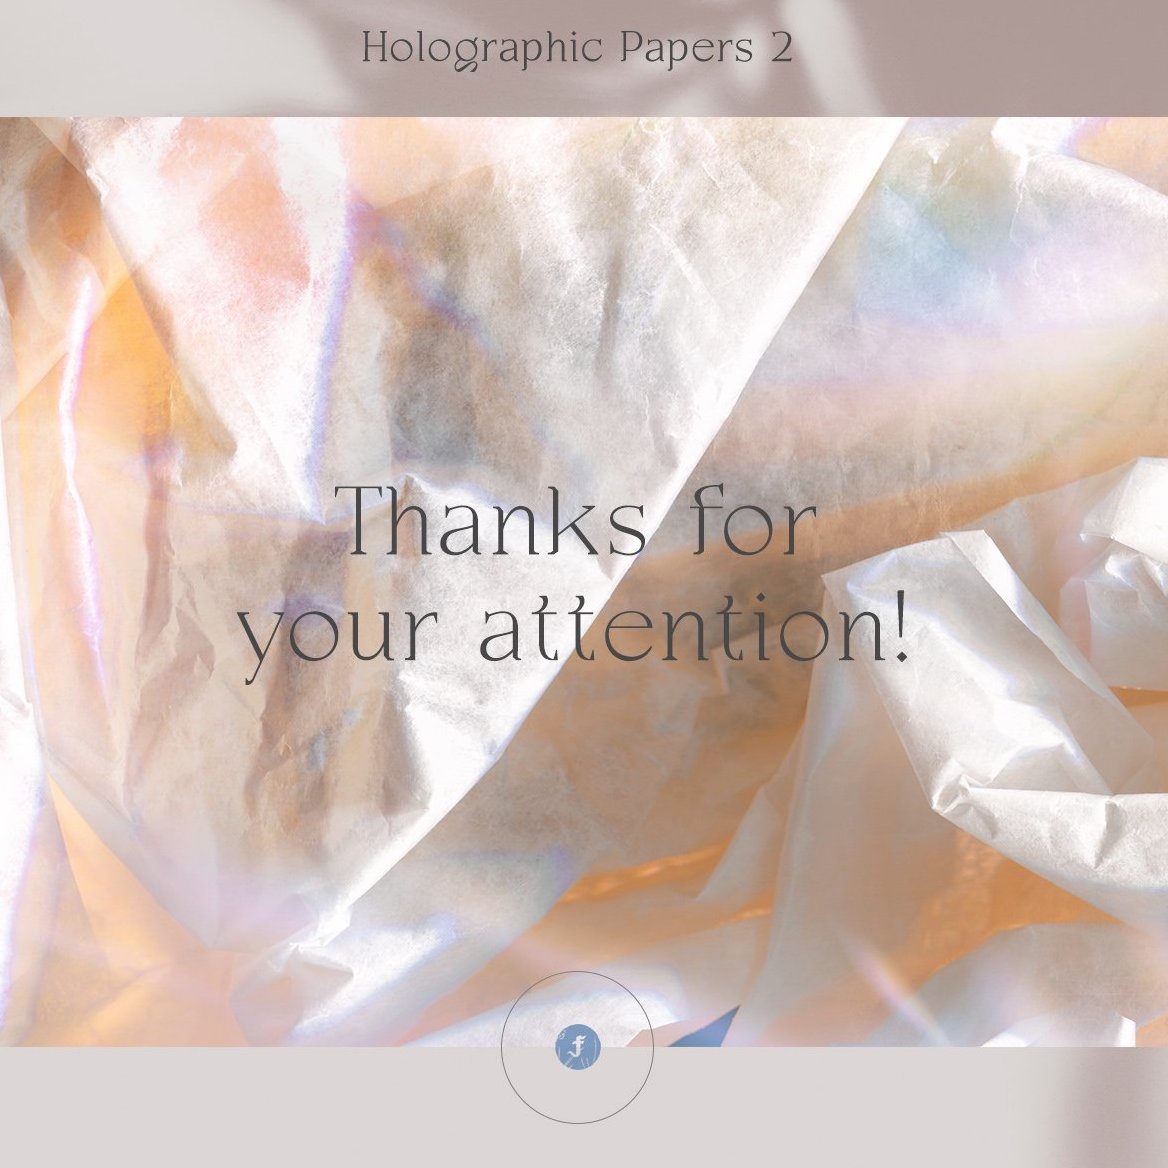 holographic papers textures 21